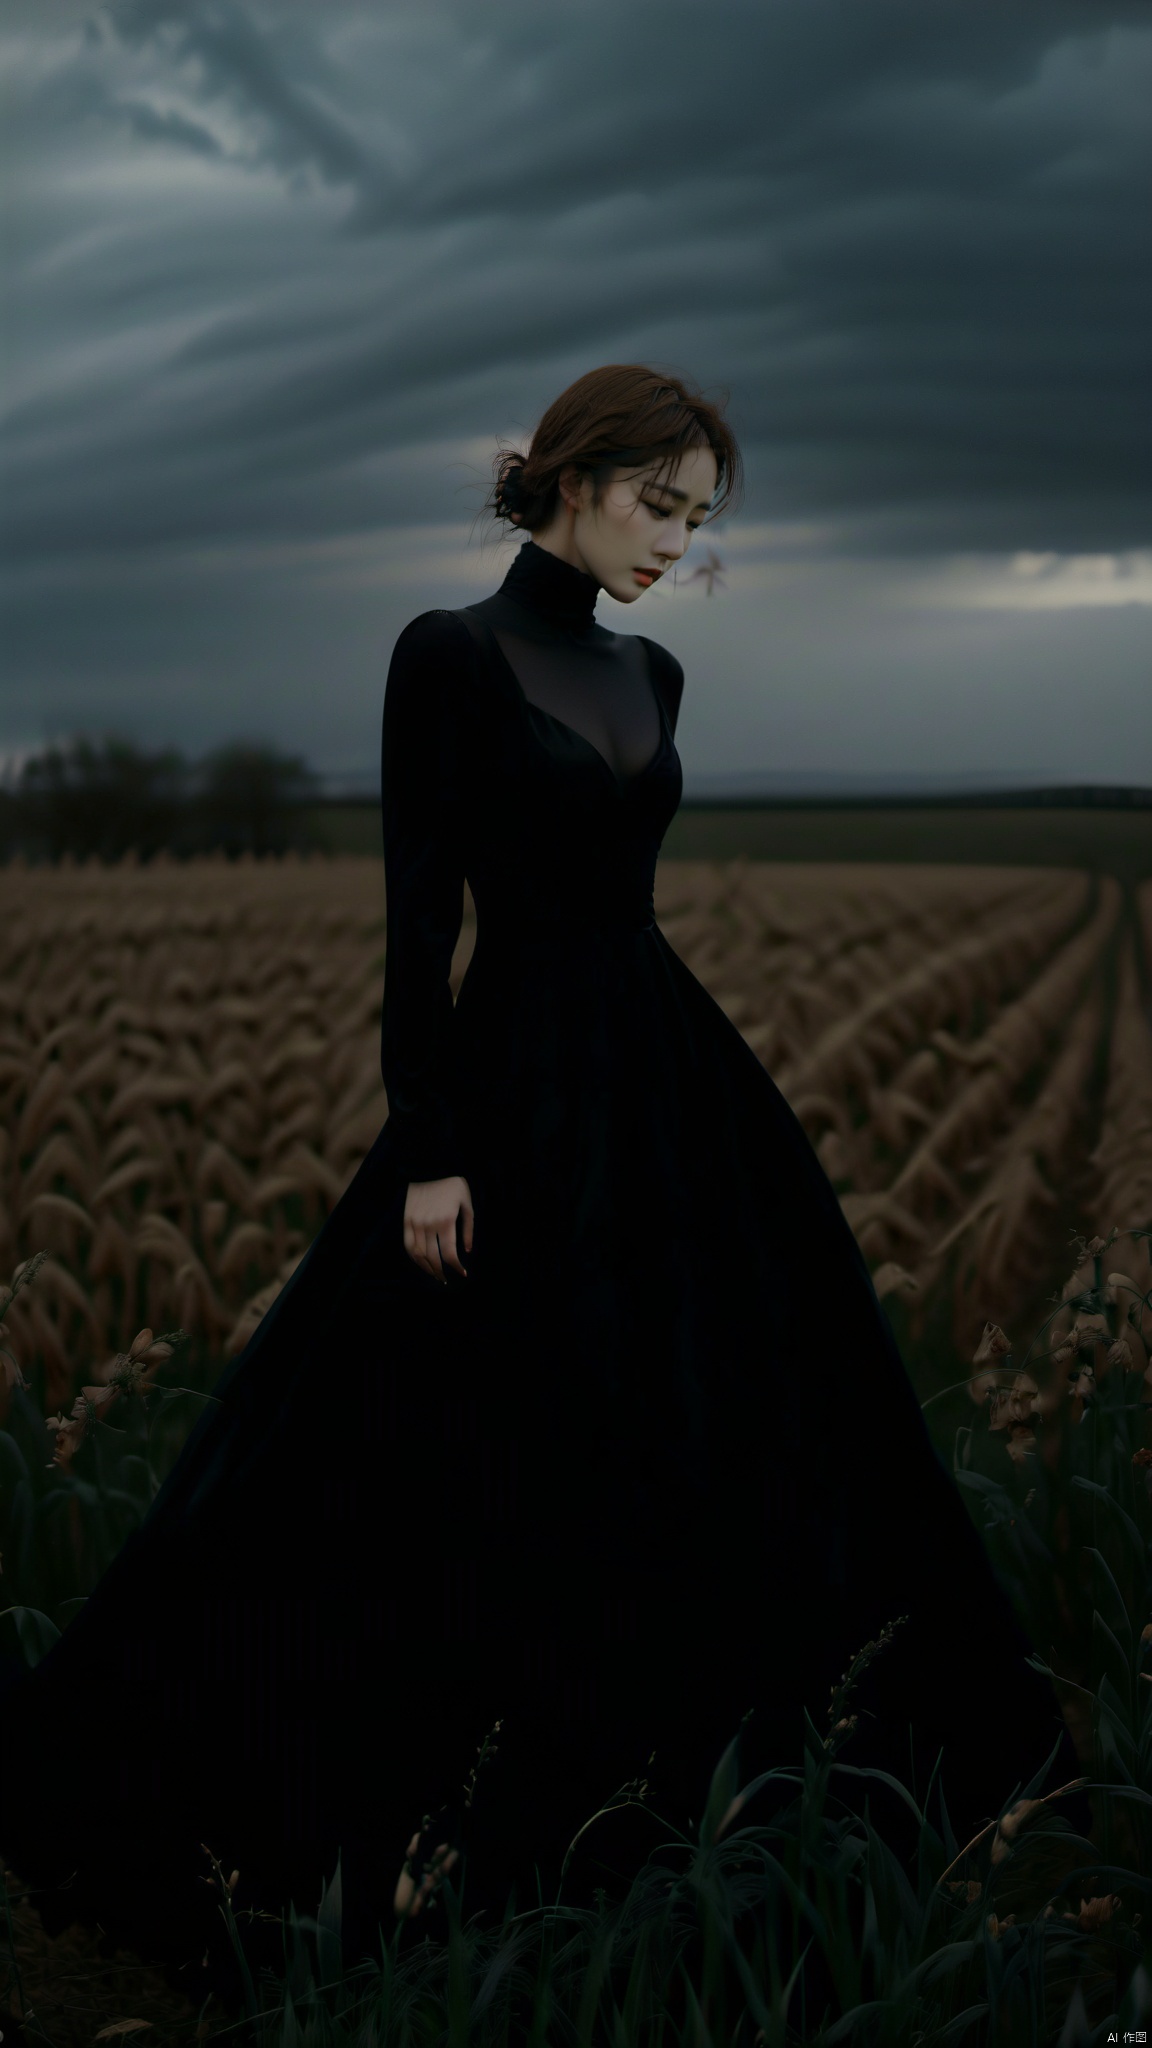  elegant woman in a black evening gown standing in a field, overcast sky, dusk, solitary and mysterious atmosphere, graceful yet melancholic posture, high-quality digital photography, soft lighting, outdoor, natural landscape, dramatic, emotional tension, best quality, ultra highres, original, extremely detailed, perfect lighting